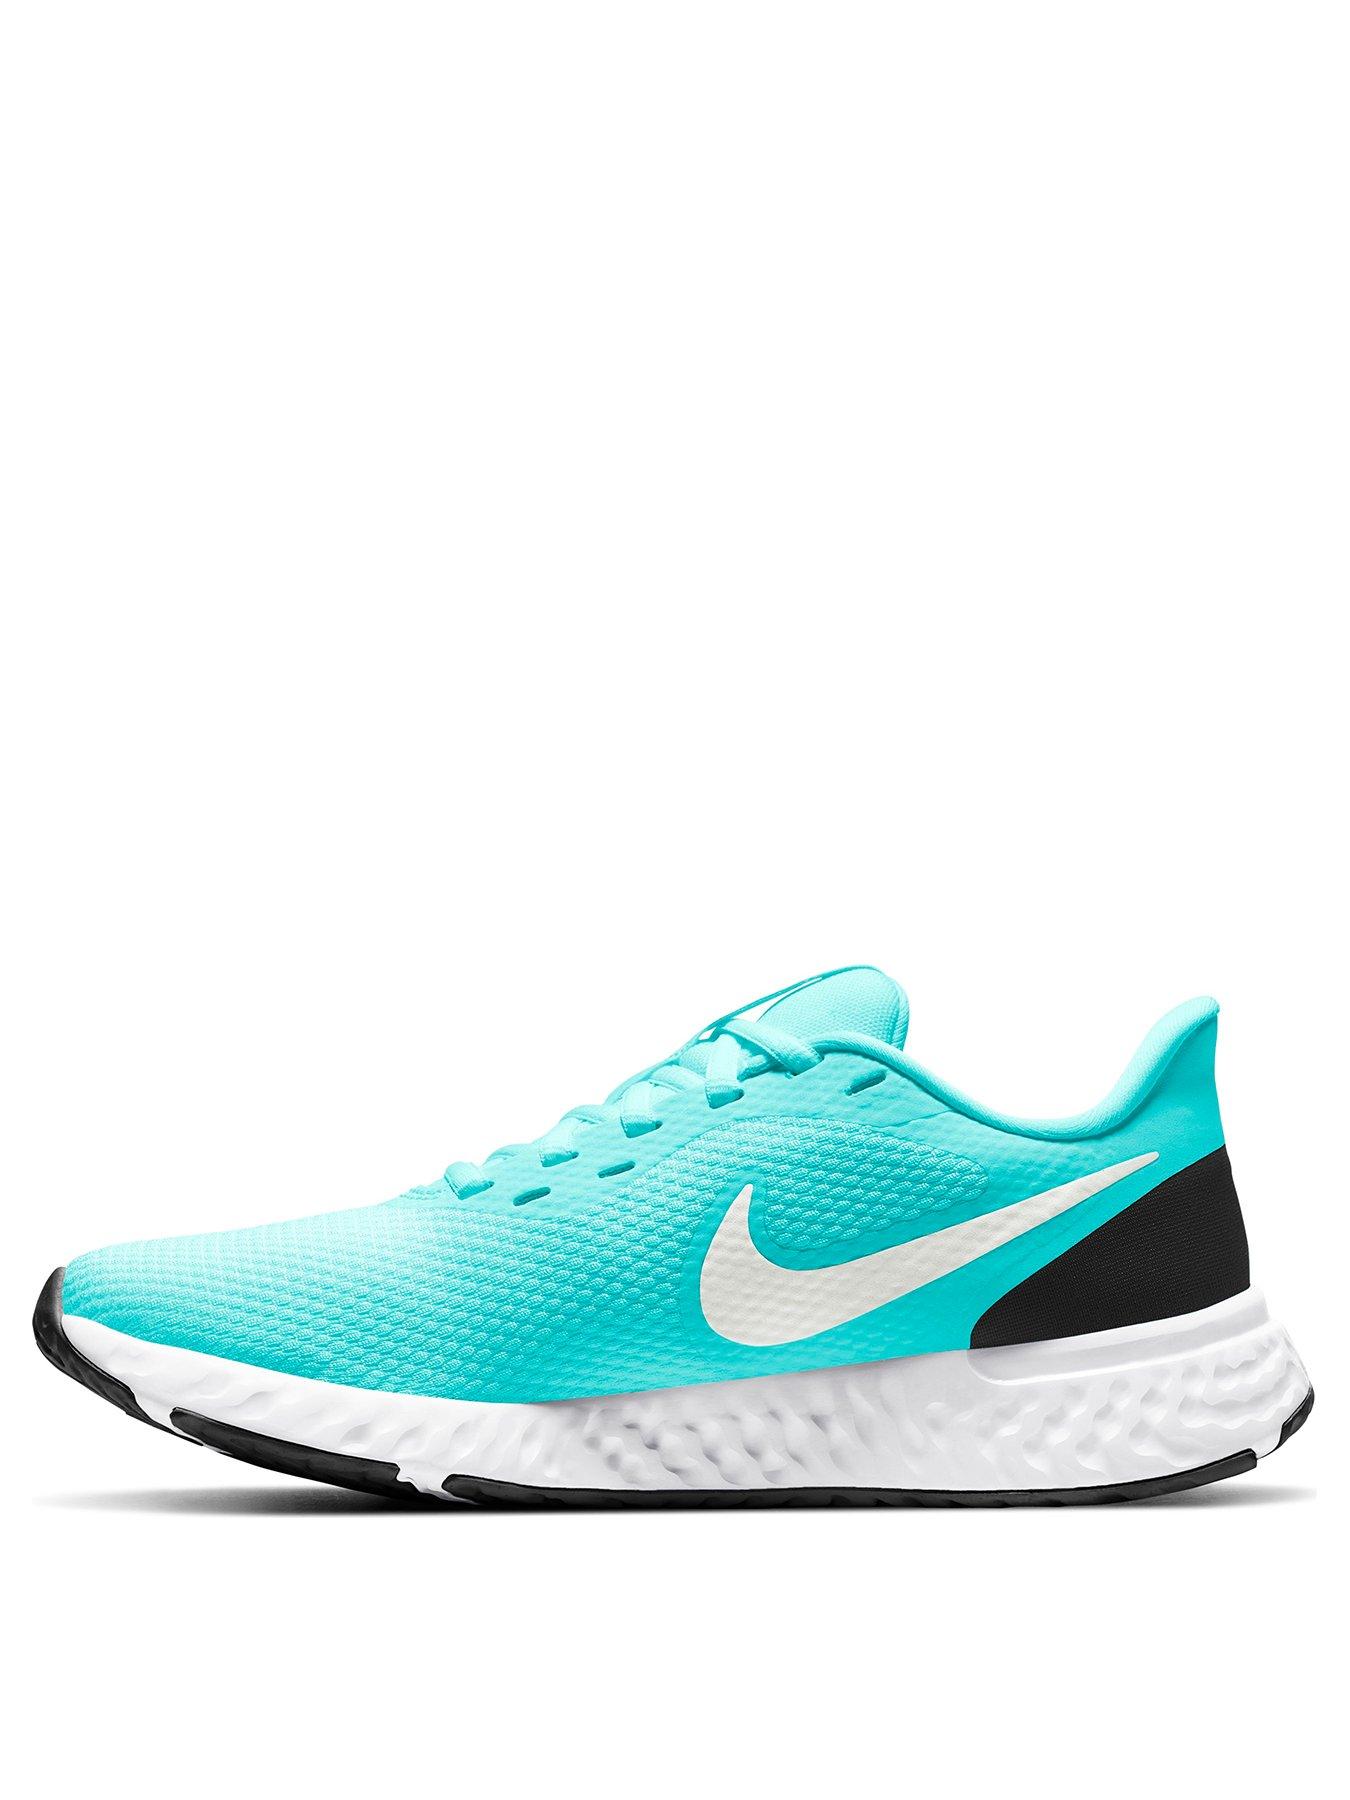 womens turquoise trainers uk